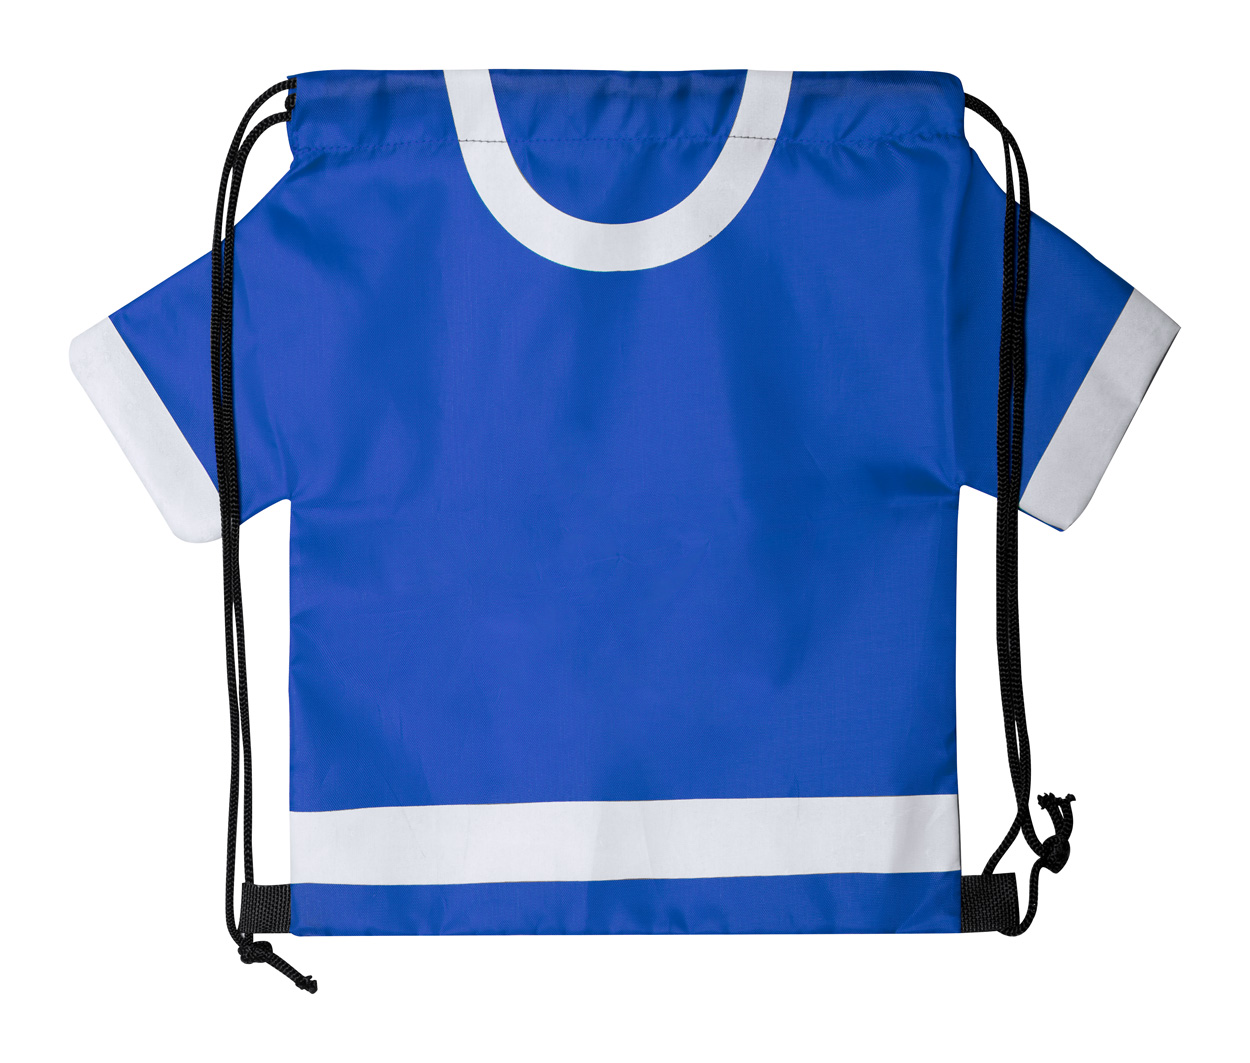 Children's polyester drawstring backpack TROKYN in the shape of a T-shirt